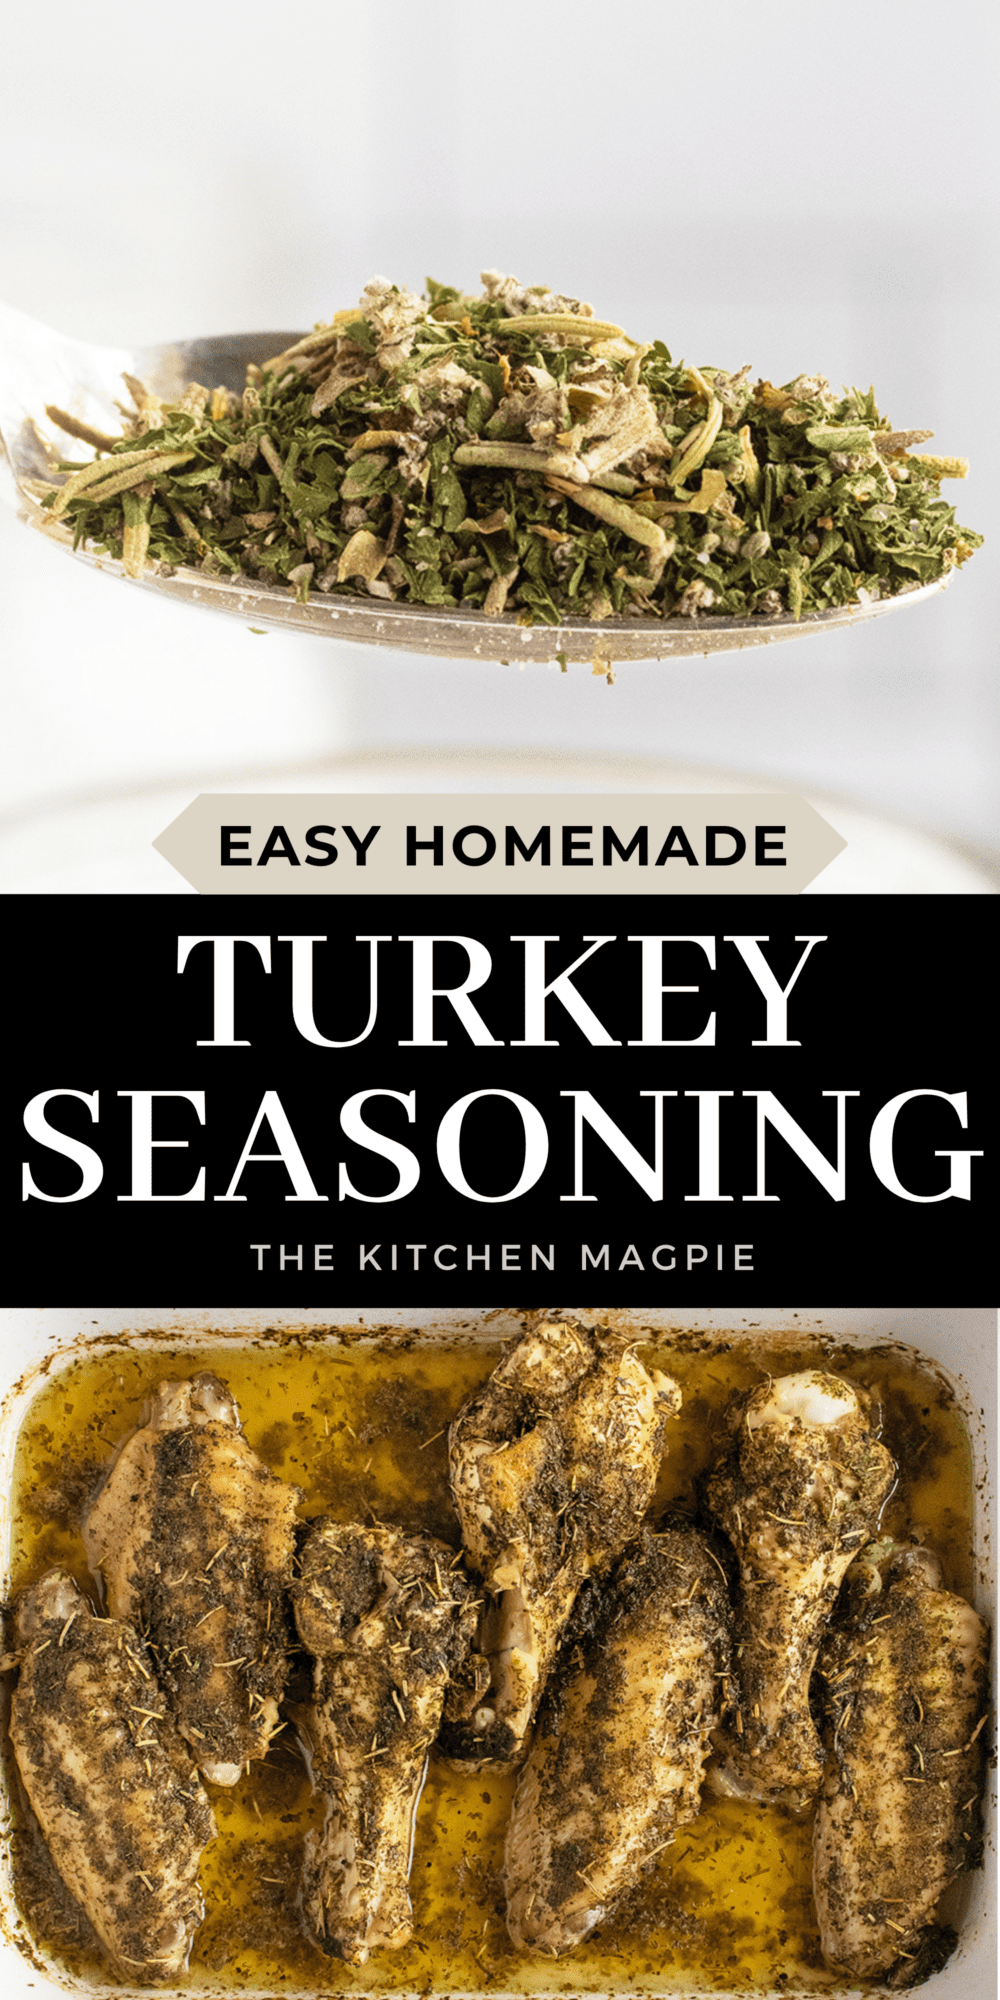 Whether roasting a whole turkey or frying up some turkey wings, add this seasoning blend to create a flavor-packed meal.